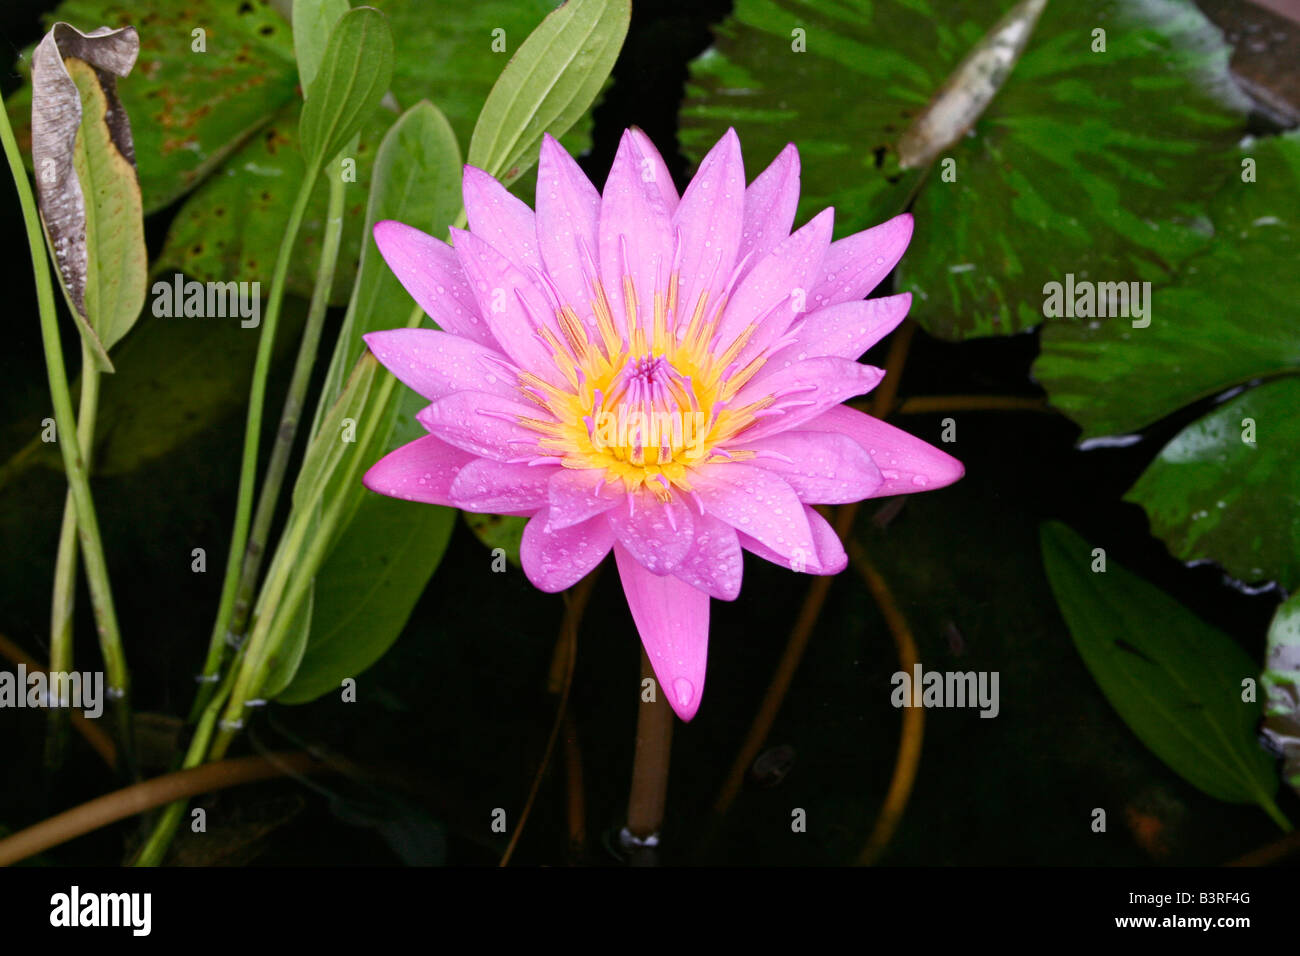 Pink yellow tropical water lily in flower, Thailand Stock Photo